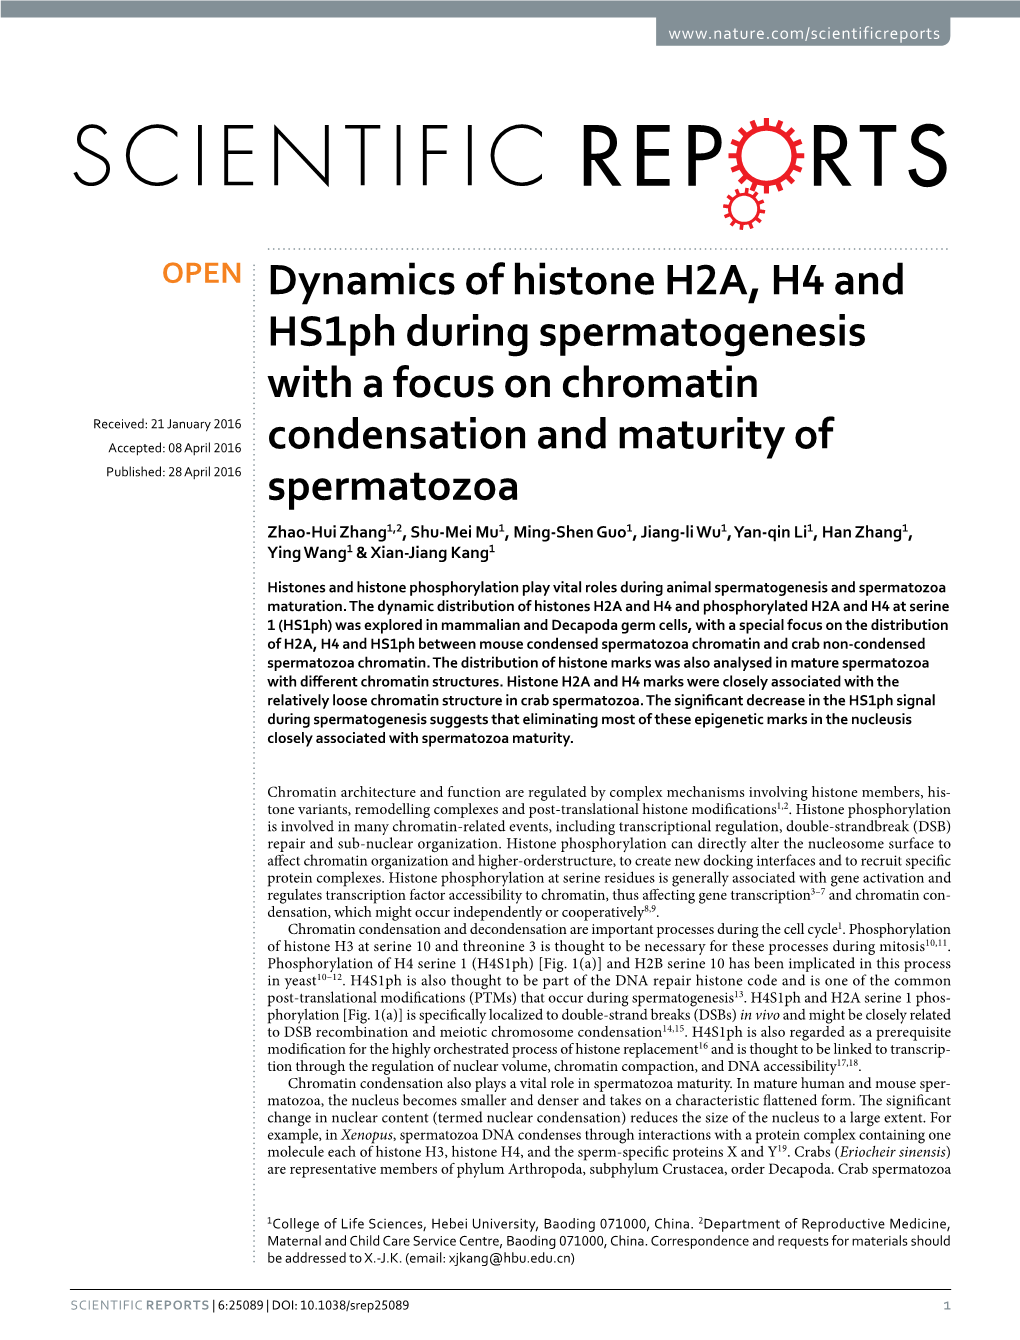 Dynamics of Histone H2A, H4 and Hs1ph During Spermatogenesis